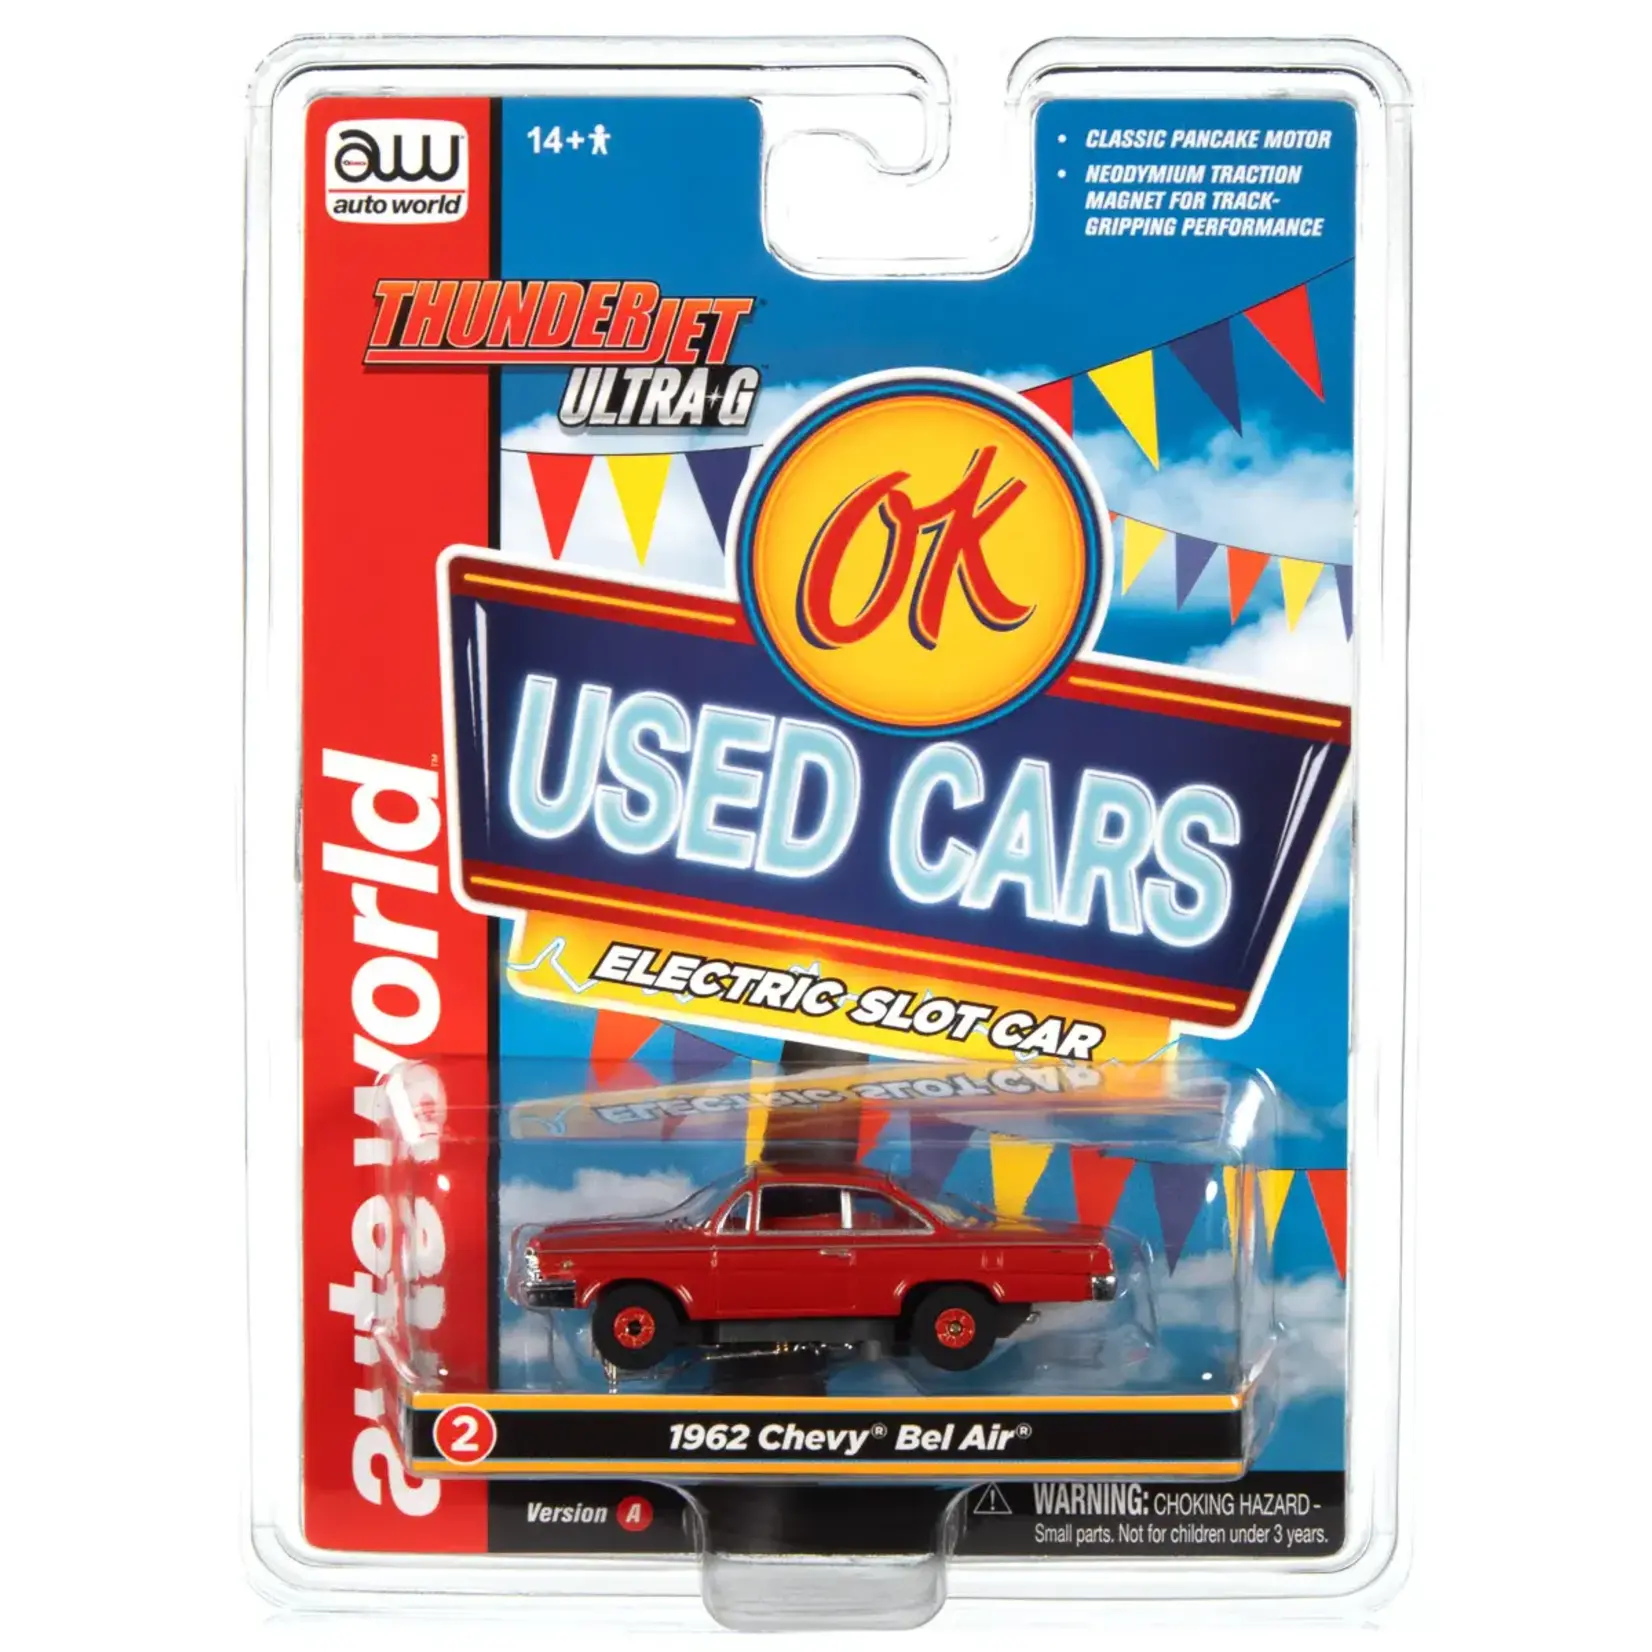 Auto World SC390A2 Auto World Thunderjet OK Used Cars 1962 Chevrolet Bel Air Coupe (Red) HO Scale Slot Car